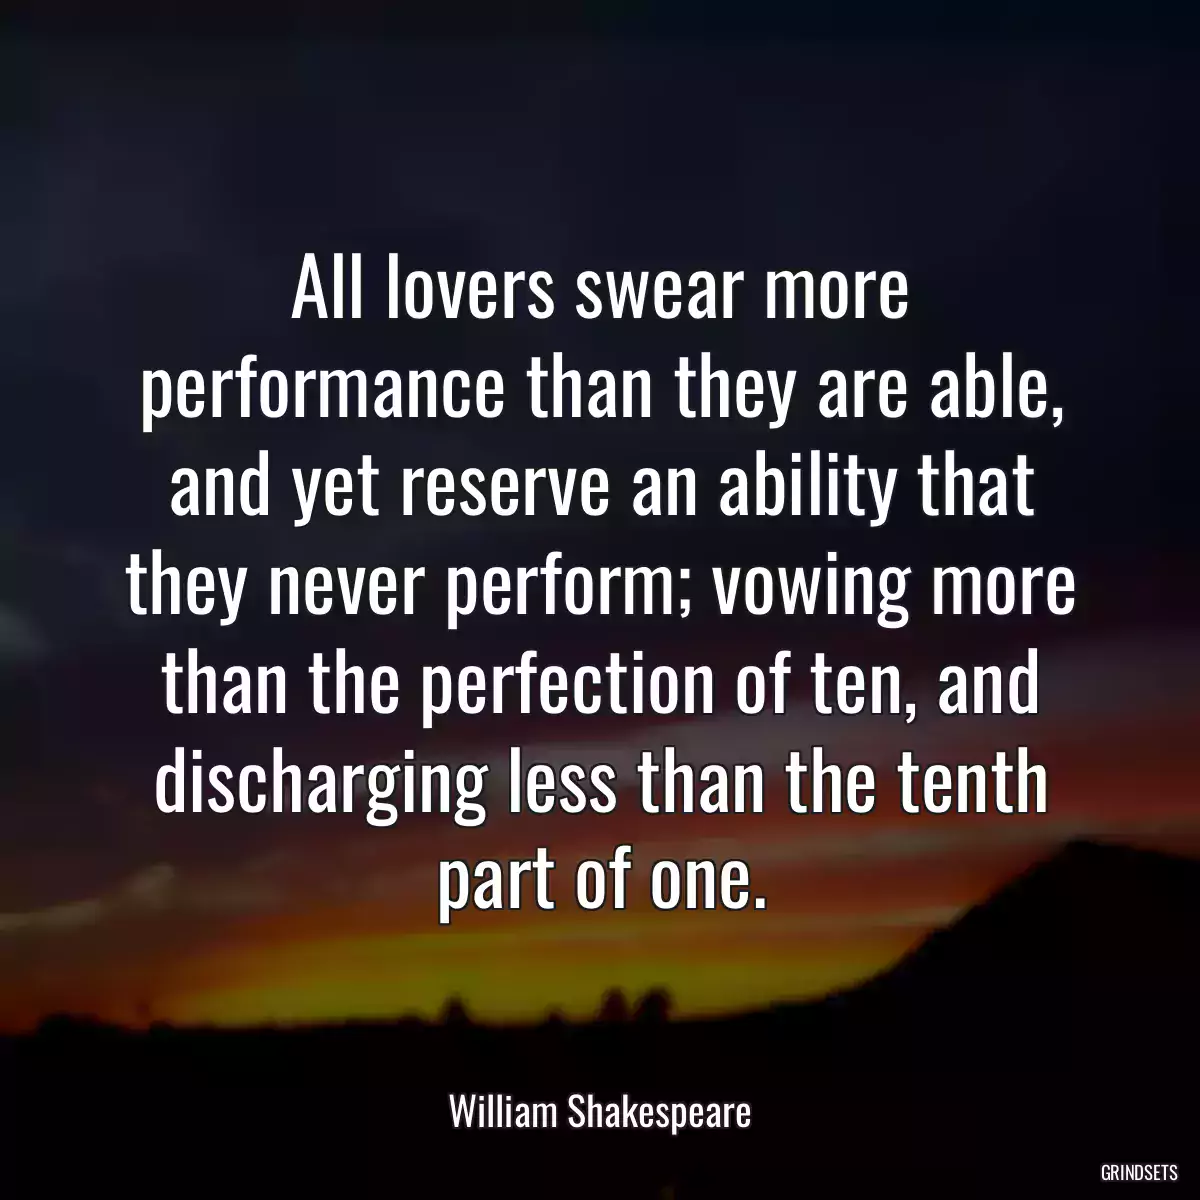 All lovers swear more performance than they are able, and yet reserve an ability that they never perform; vowing more than the perfection of ten, and discharging less than the tenth part of one.